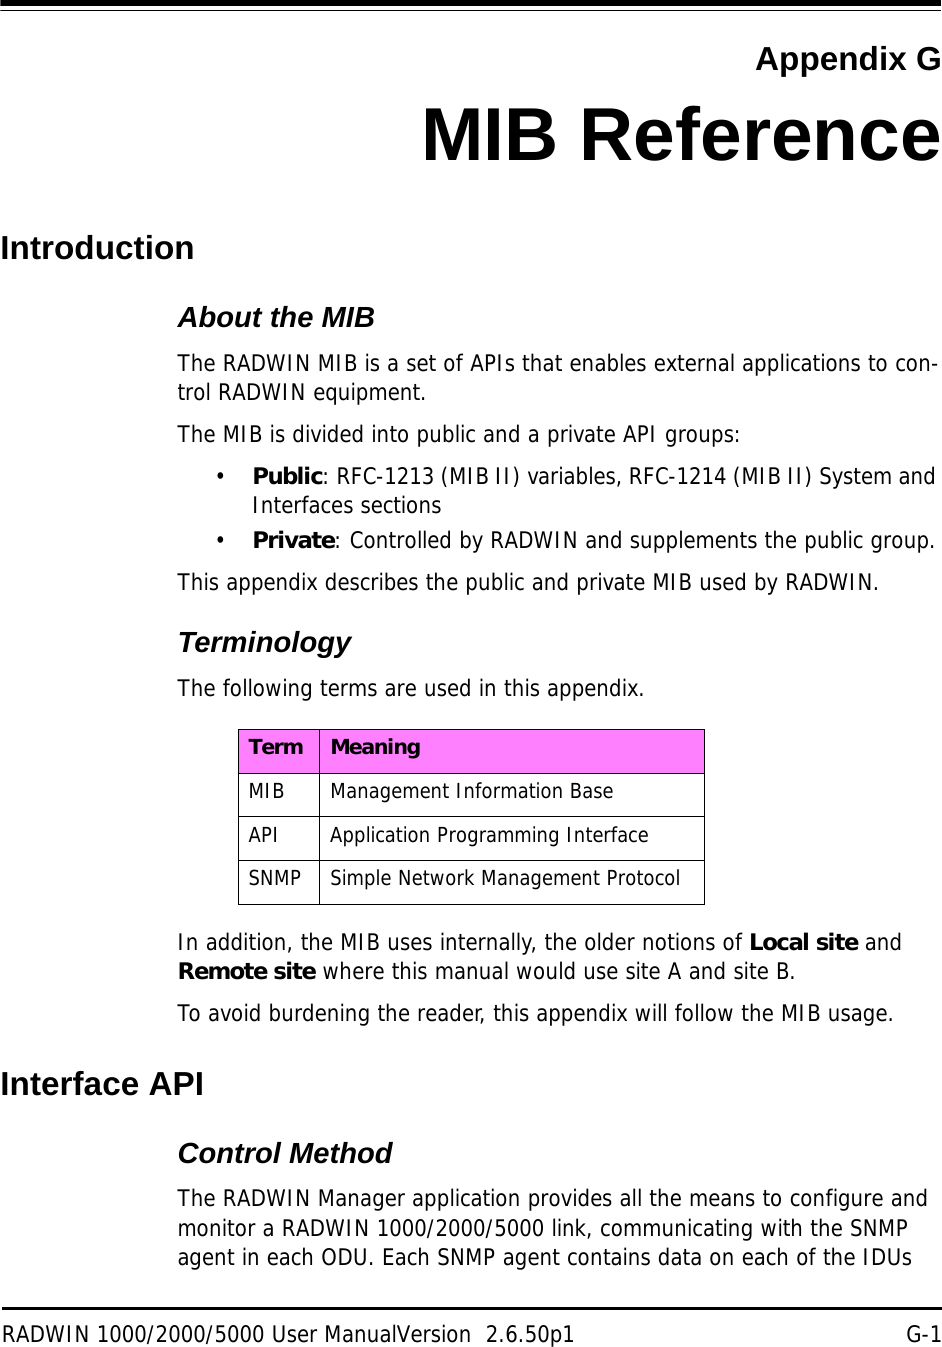 RADWIN 1000/2000/5000 User ManualVersion  2.6.50p1 G-1Appendix GMIB ReferenceIntroductionAbout the MIBThe RADWIN MIB is a set of APIs that enables external applications to con-trol RADWIN equipment.The MIB is divided into public and a private API groups:•Public: RFC-1213 (MIB II) variables, RFC-1214 (MIB II) System and Interfaces sections•Private: Controlled by RADWIN and supplements the public group.This appendix describes the public and private MIB used by RADWIN.TerminologyThe following terms are used in this appendix.In addition, the MIB uses internally, the older notions of Local site and Remote site where this manual would use site A and site B.To avoid burdening the reader, this appendix will follow the MIB usage.Interface APIControl MethodThe RADWIN Manager application provides all the means to configure and monitor a RADWIN 1000/2000/5000 link, communicating with the SNMP agent in each ODU. Each SNMP agent contains data on each of the IDUs Term MeaningMIB Management Information BaseAPI Application Programming InterfaceSNMP Simple Network Management Protocol